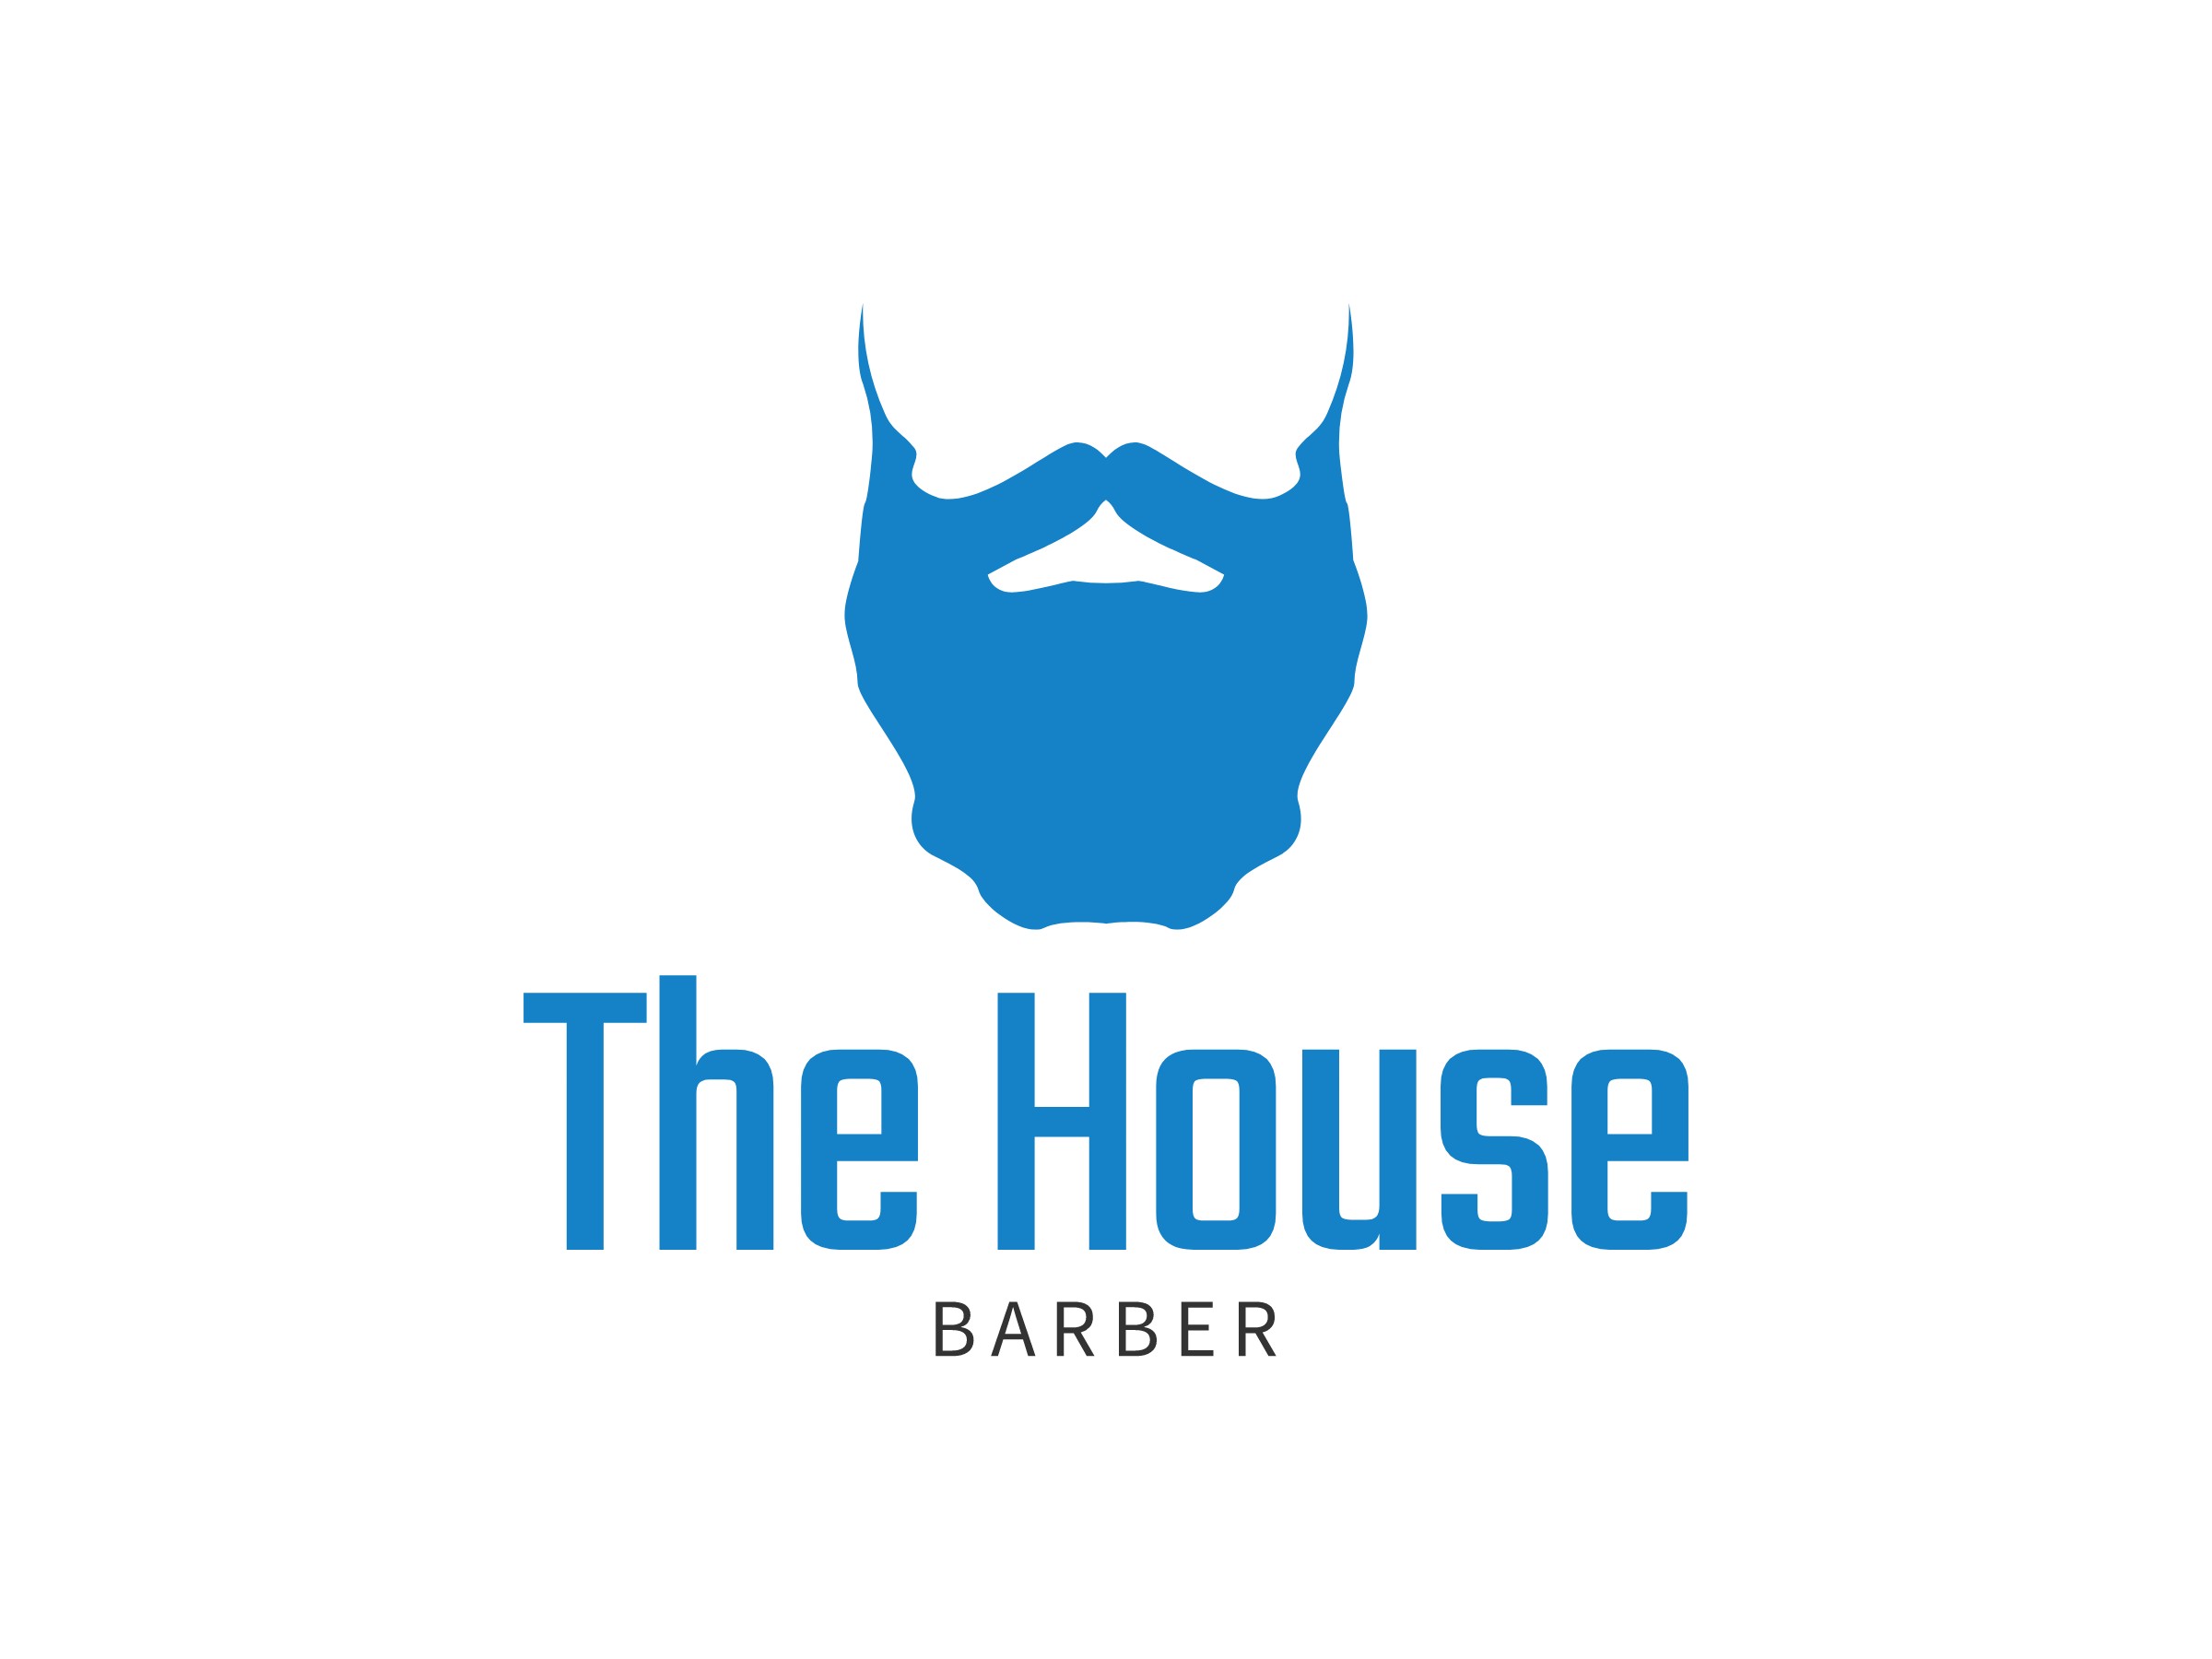 The House - Barber